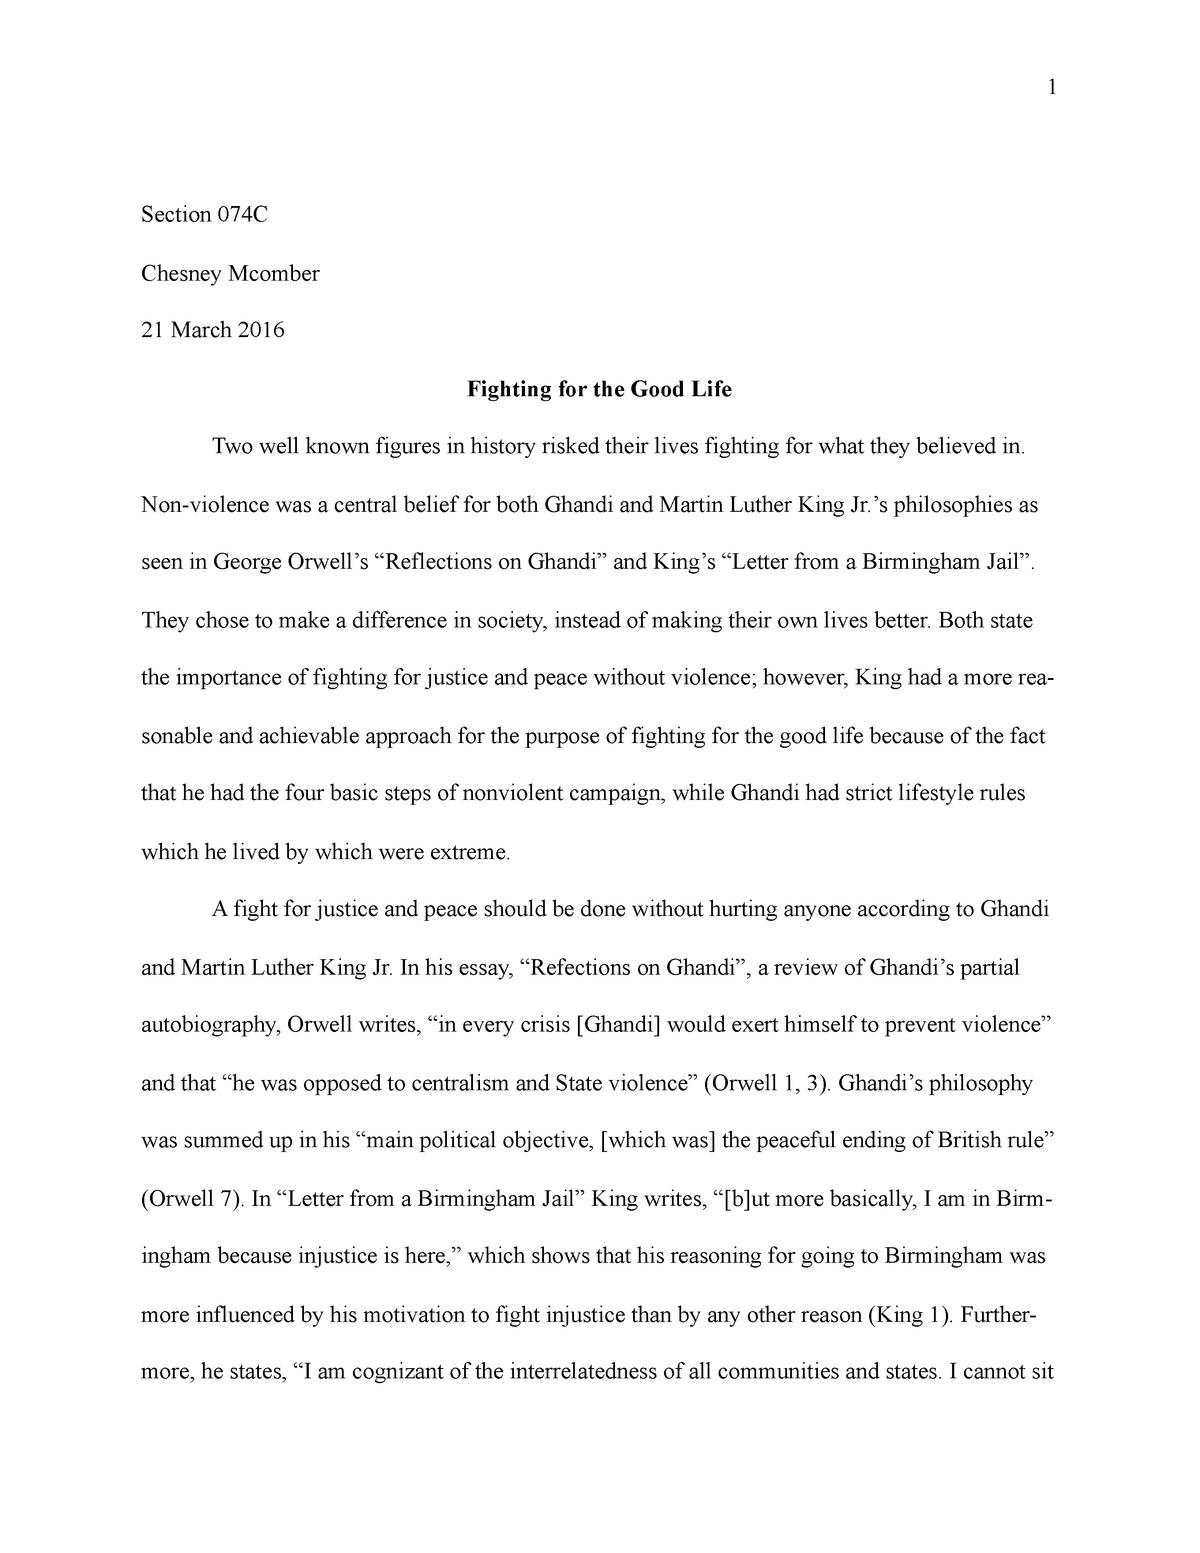 essay about fighting in life